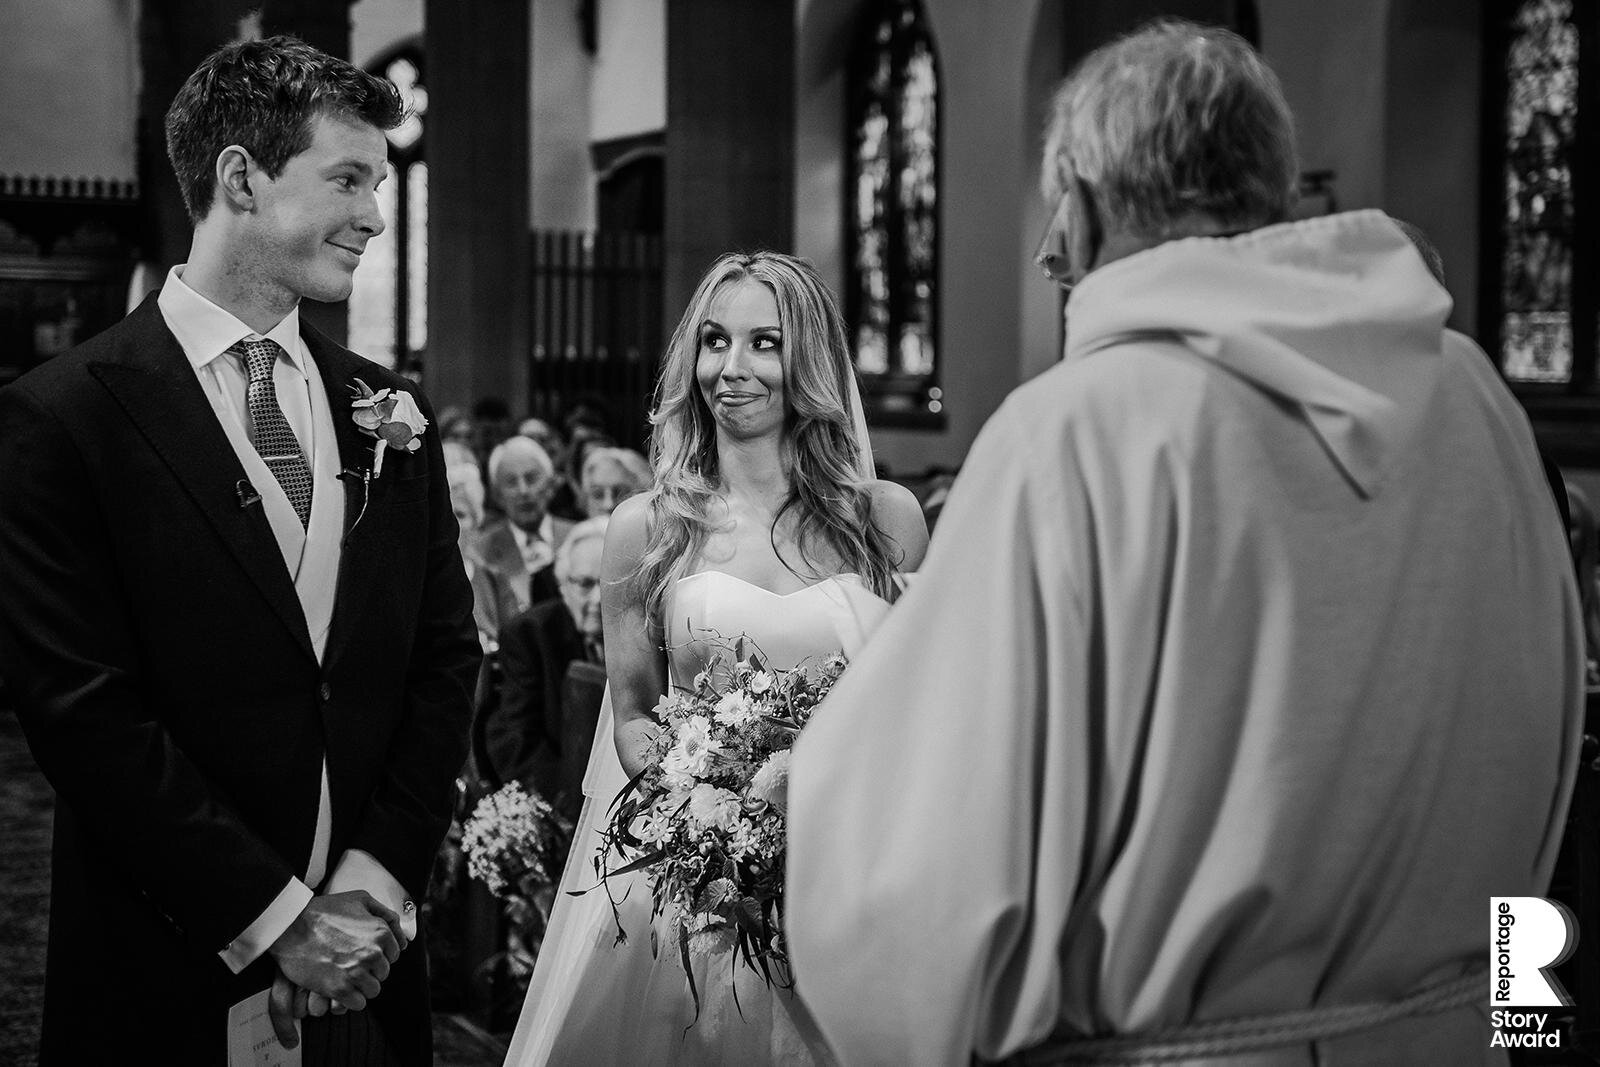  funny moment between the bride and groom at the alter 